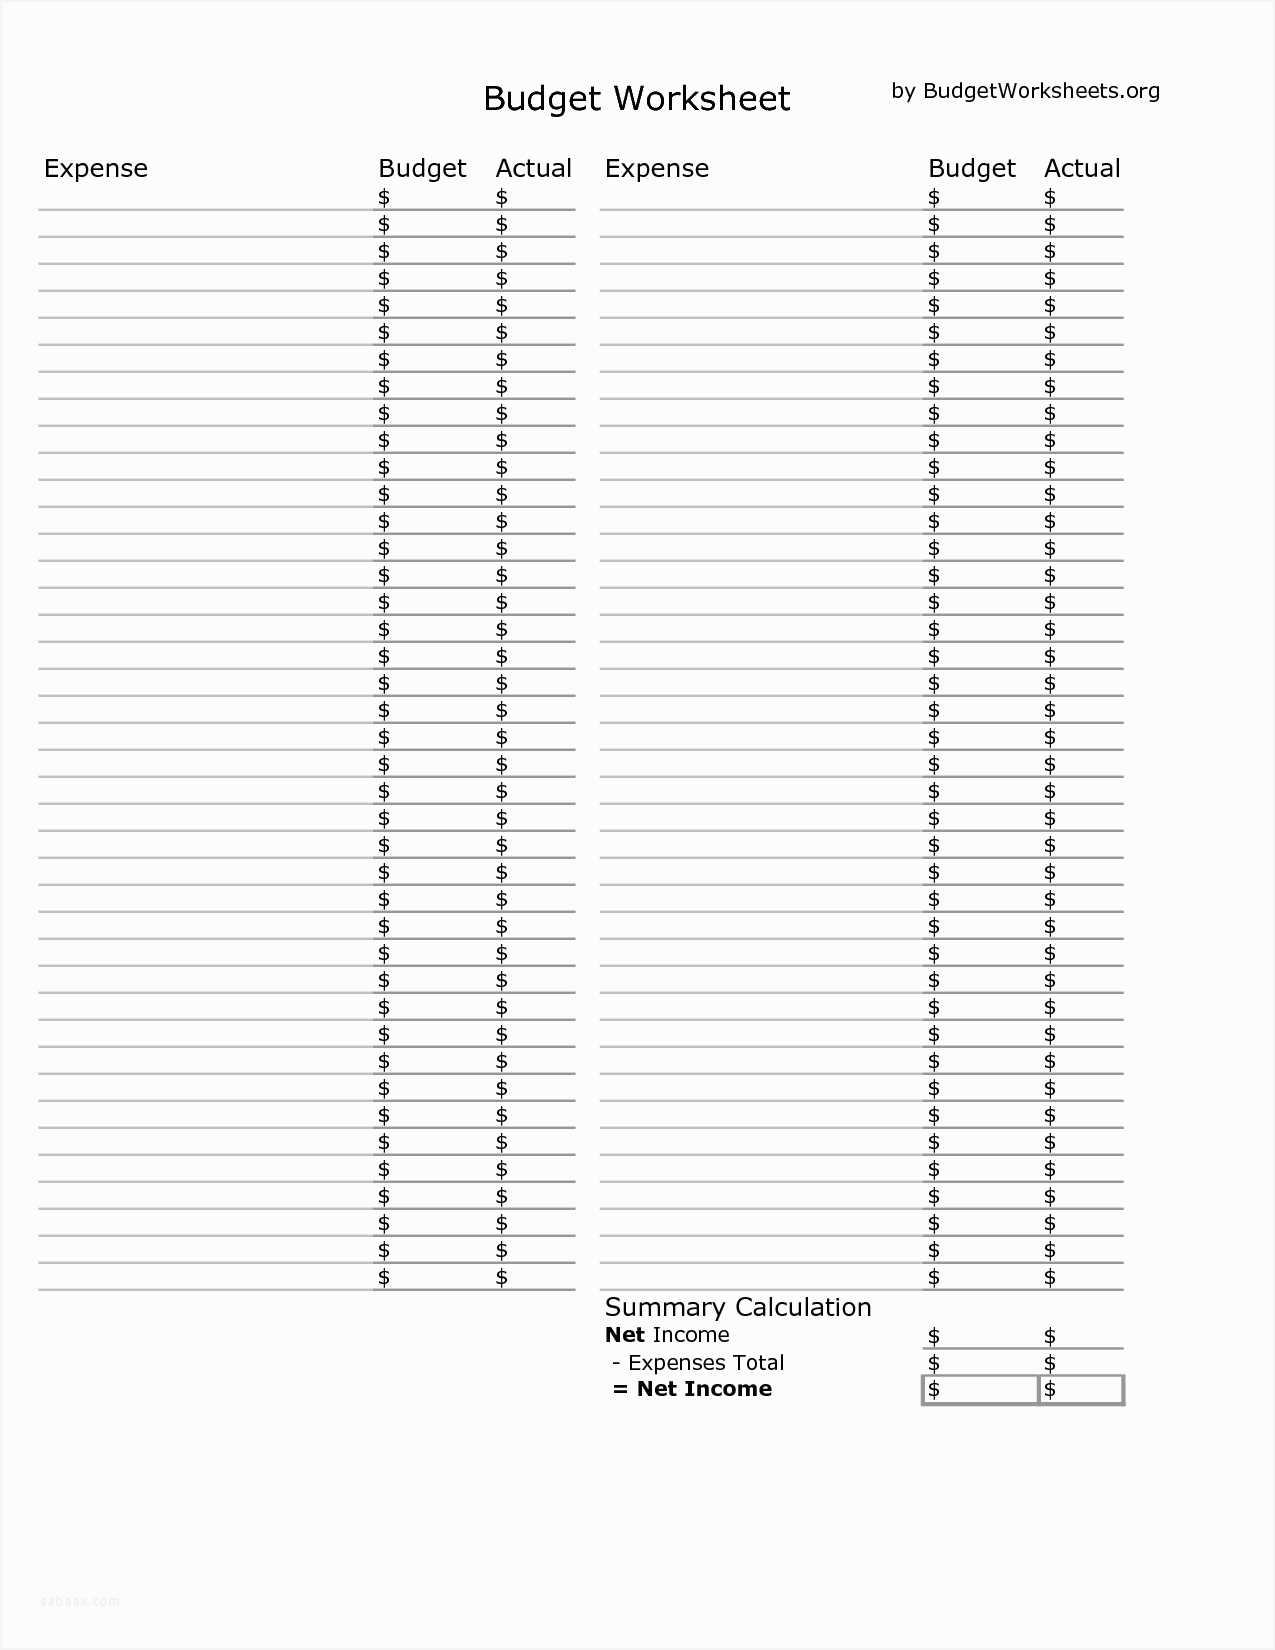 Retirement Budget Worksheet together with Awesome Bud Worksheet – Sabaax